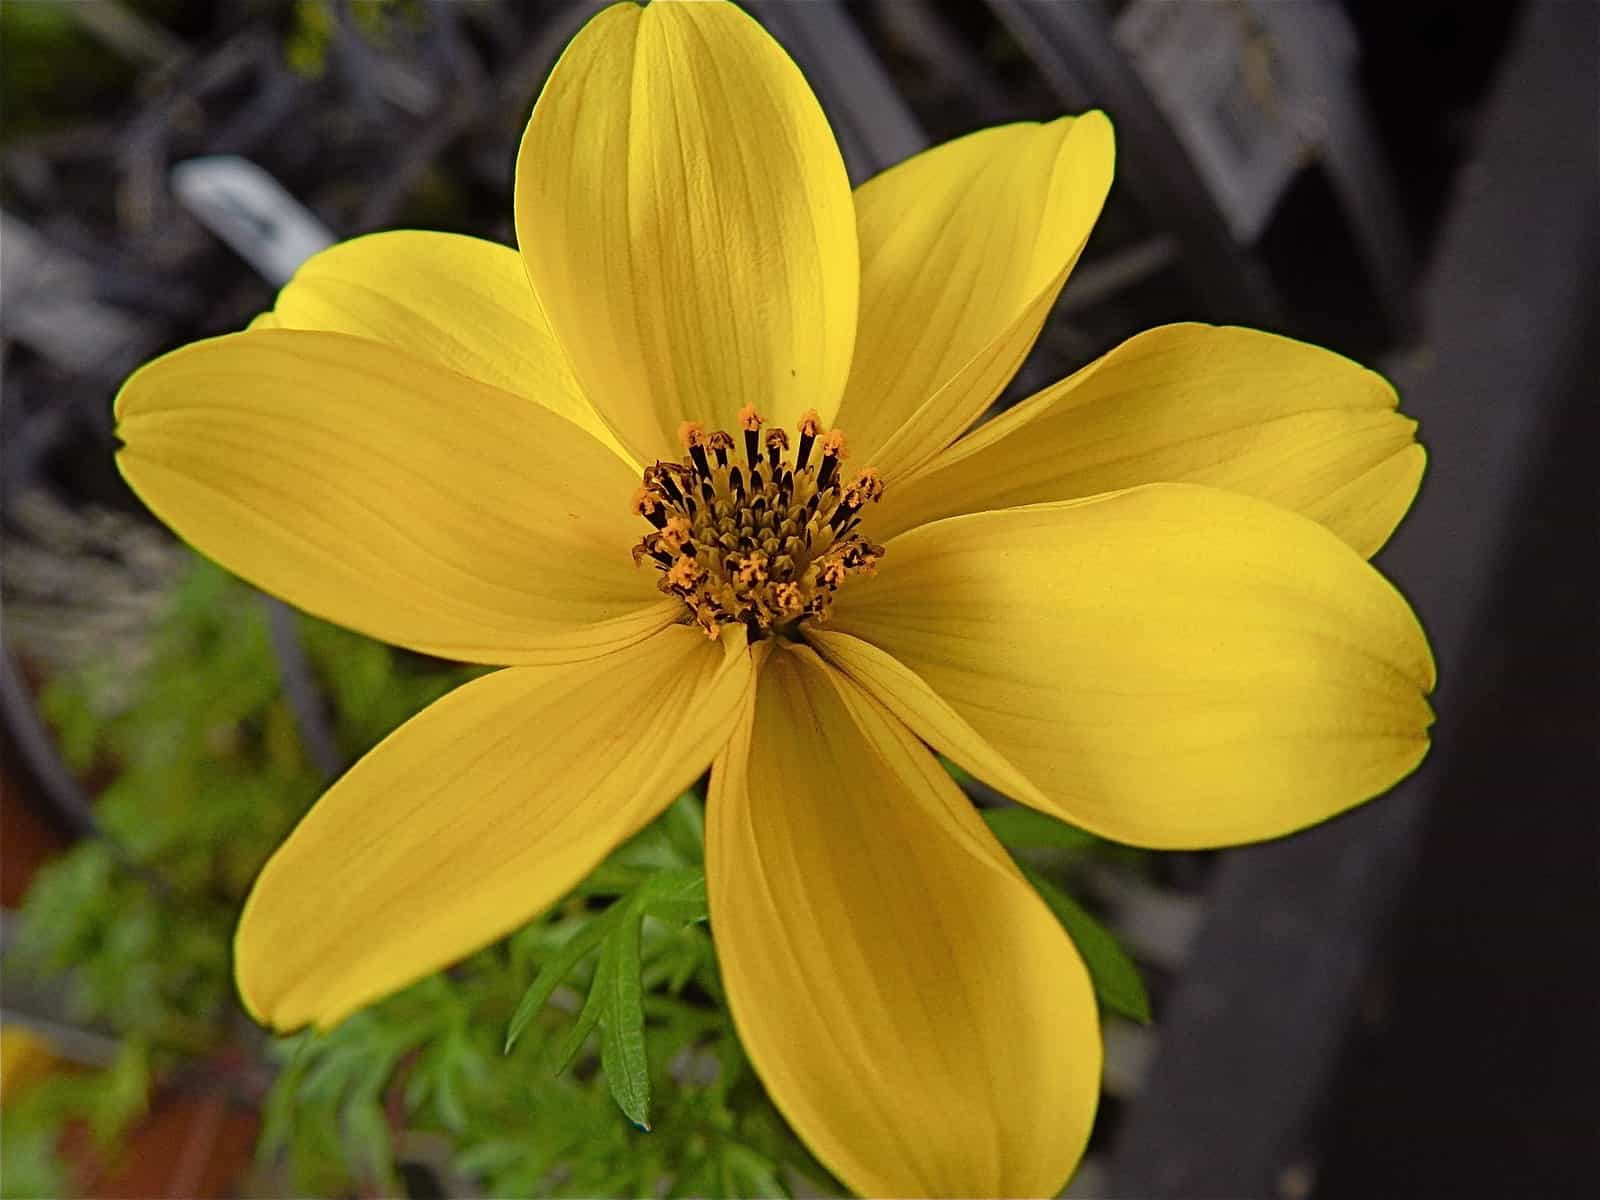 A yellow flower in a pot with strawberry tower planting. Bidens golidilocks